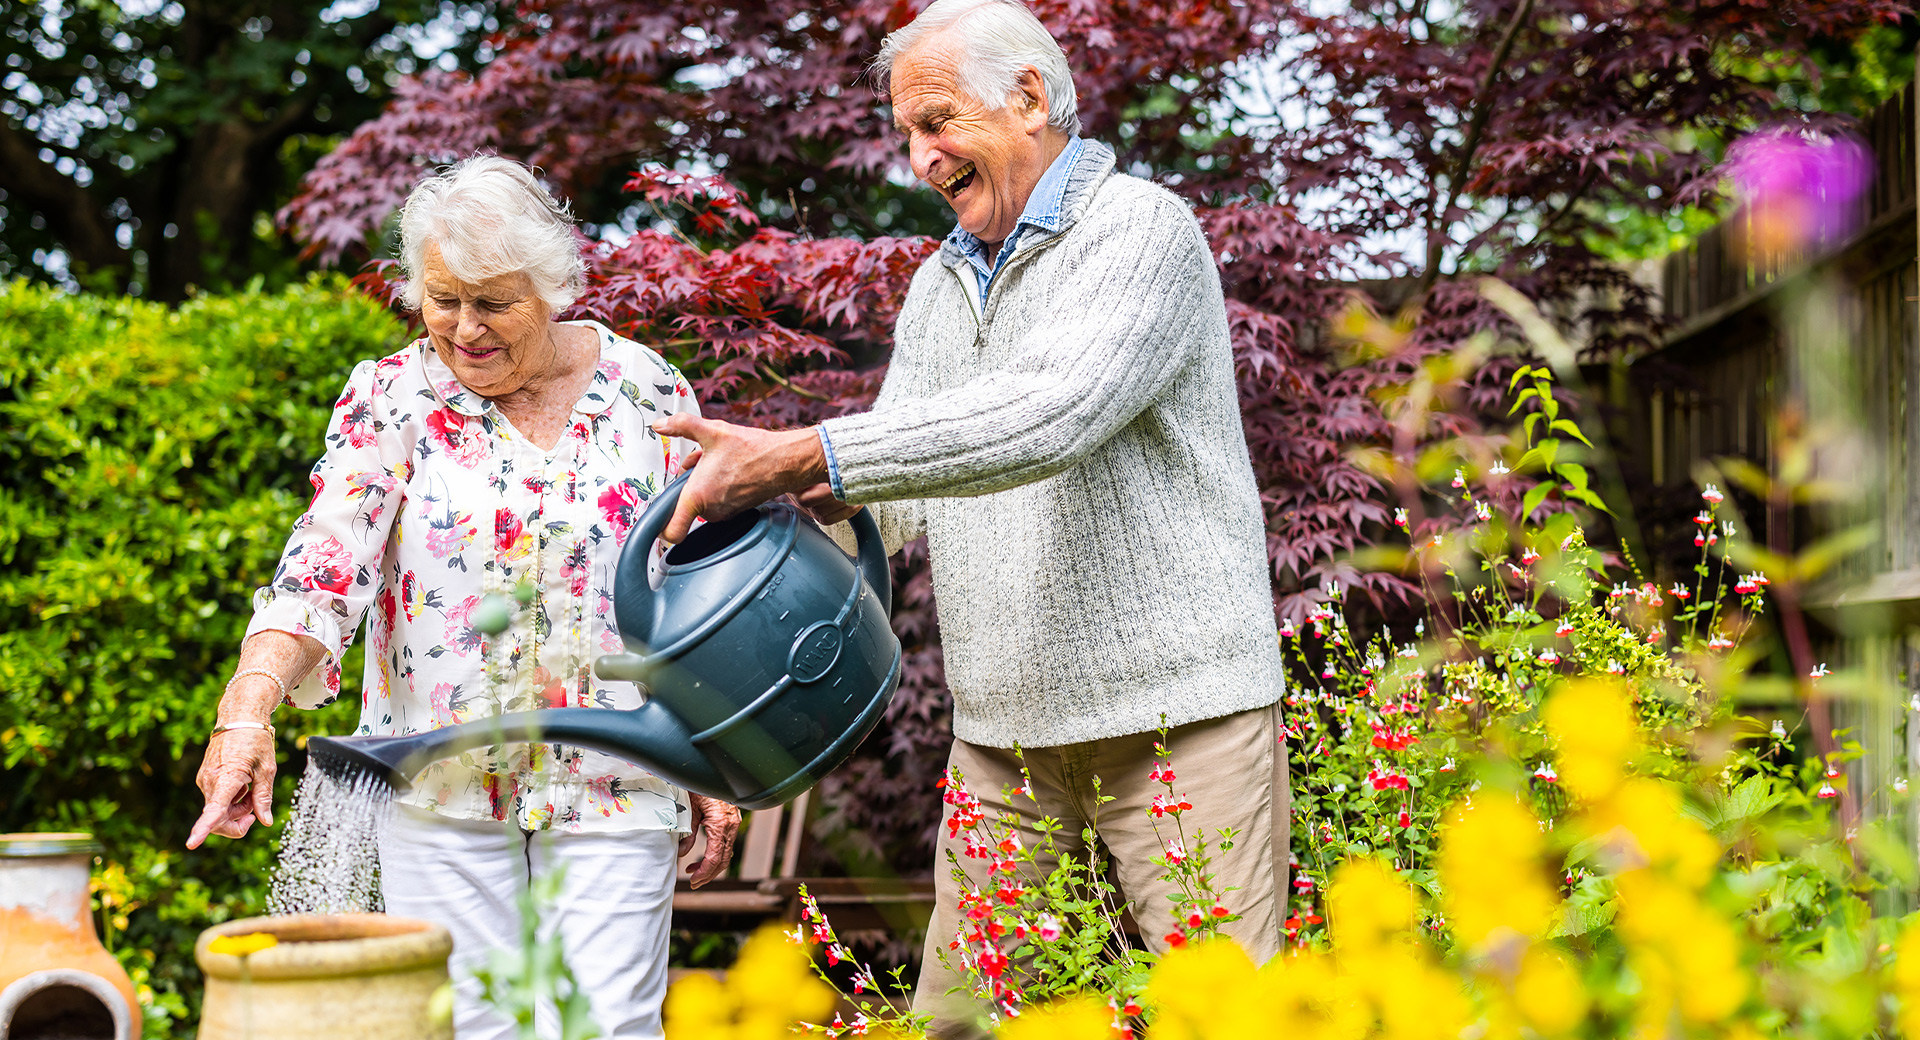 Elderly customers watering their garden with a watering can
                        